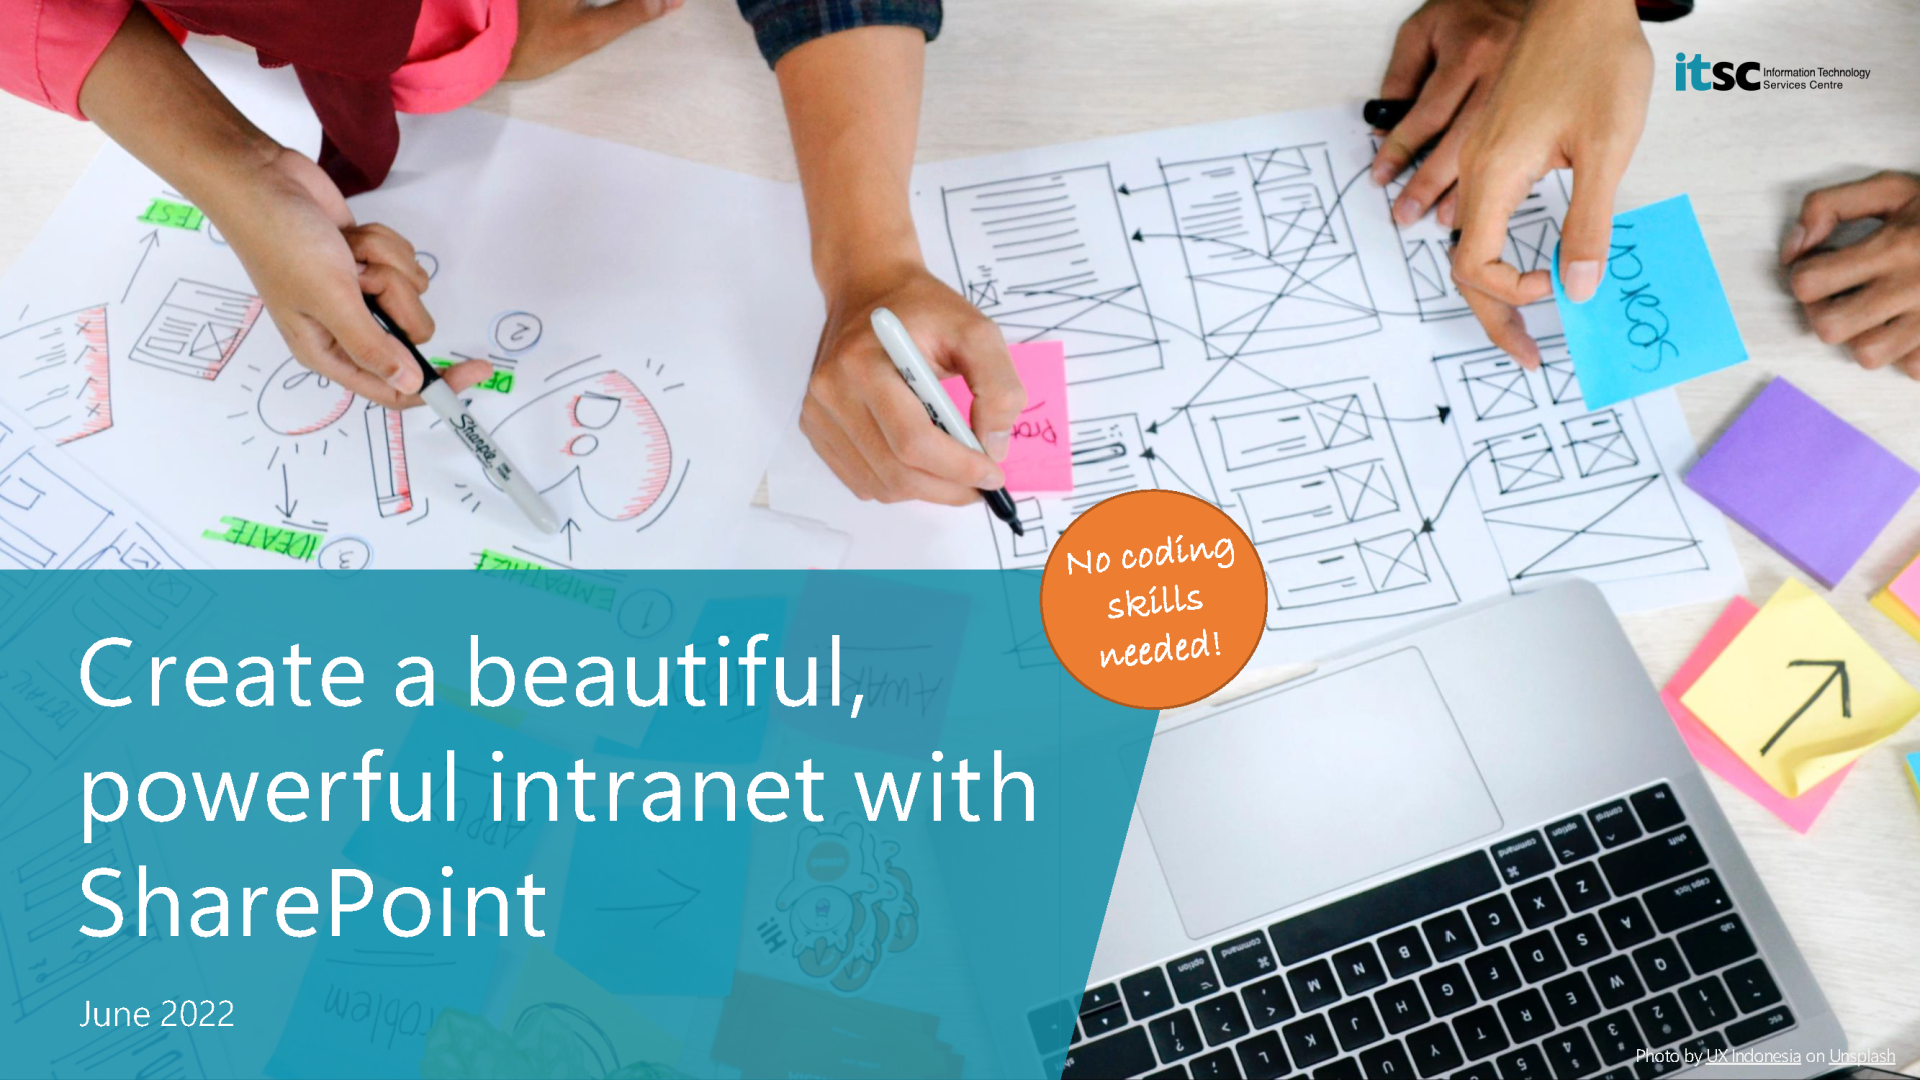 Create a beautiful, powerful intranet with SharePoint – No coding skills needed!